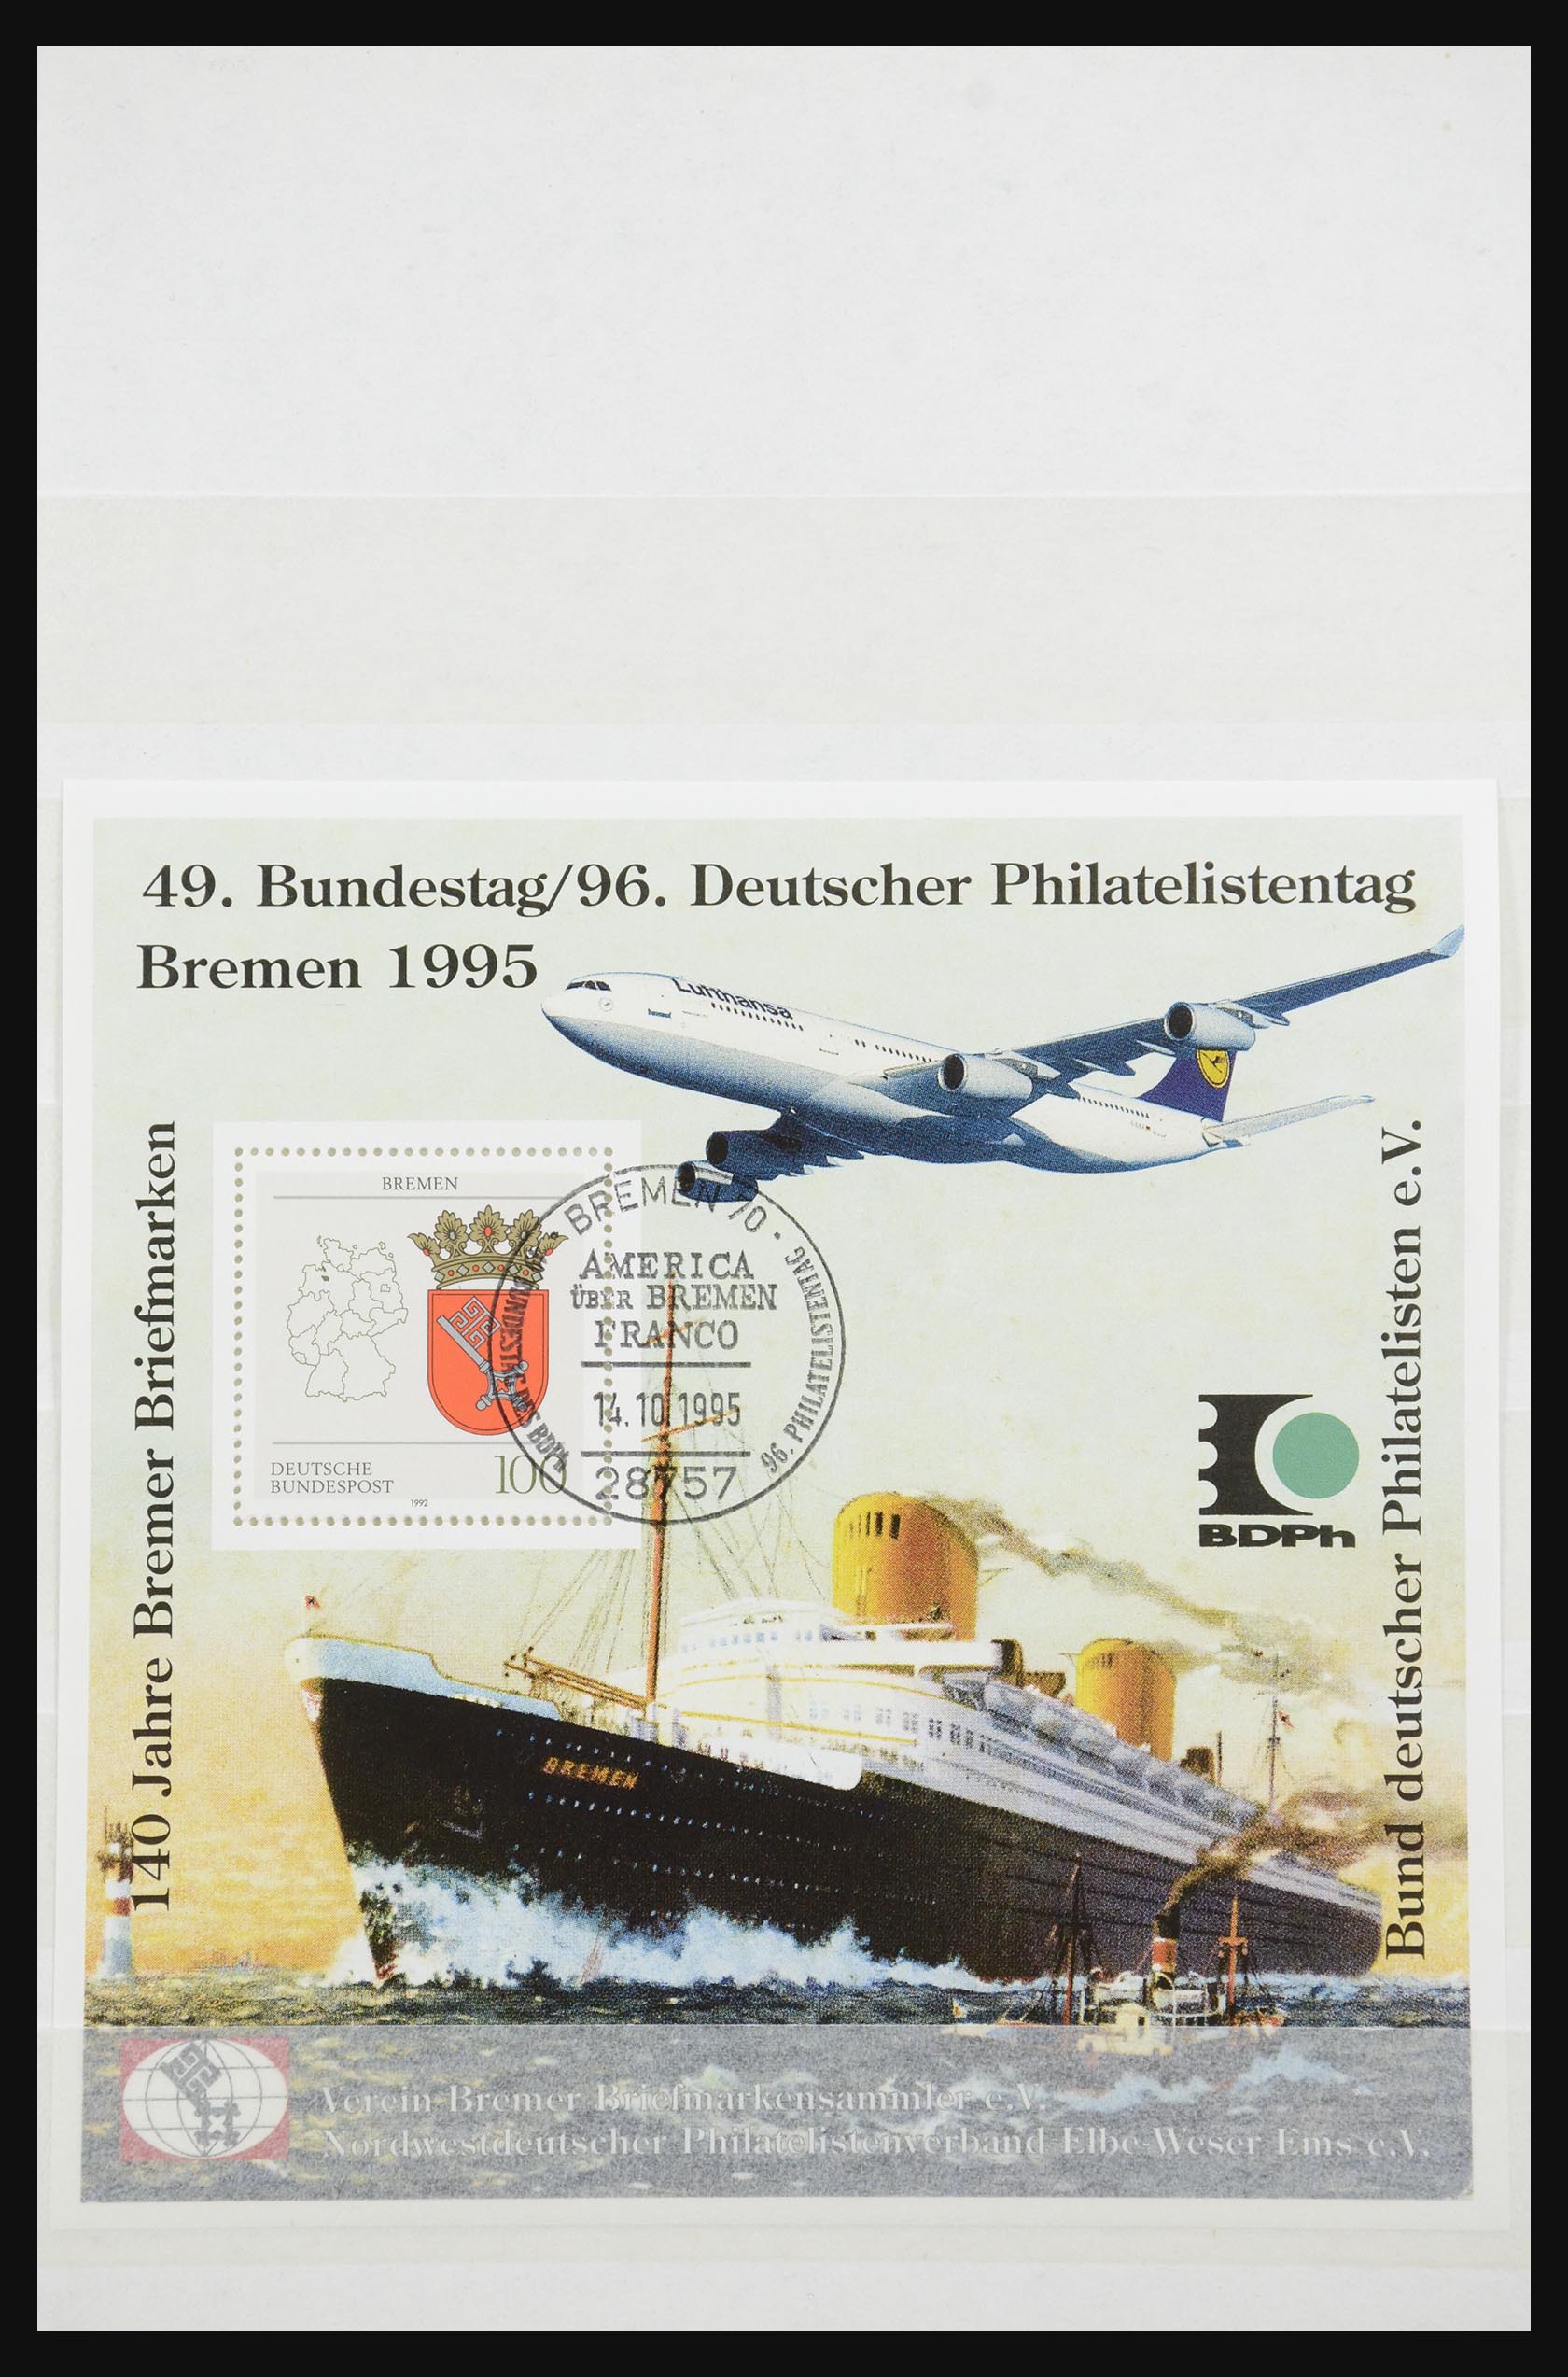 32050 033 - 32050 Bundespost special sheets 1980-2010.